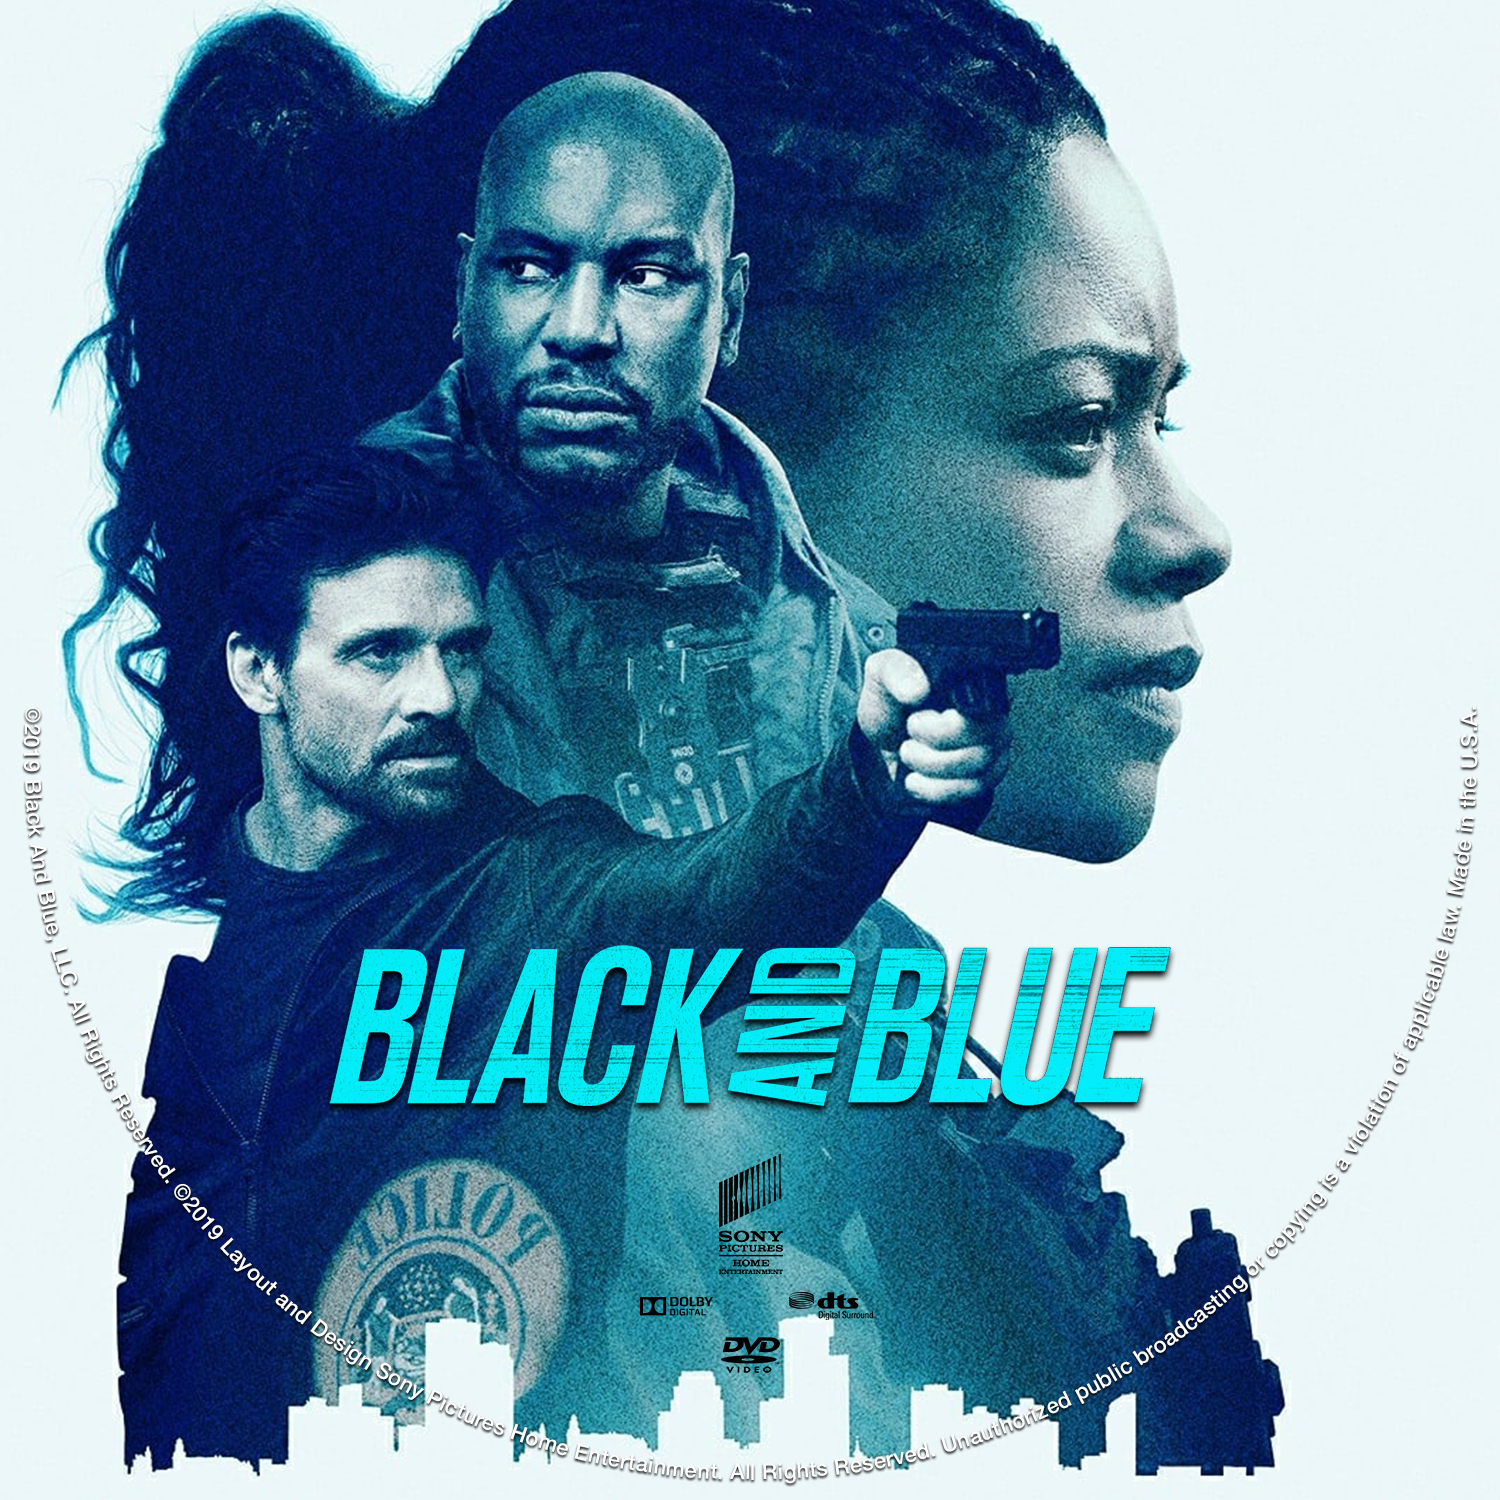 Black And Blue Dvd Label Cover Addict Free Dvd Bluray Covers And Movie Posters